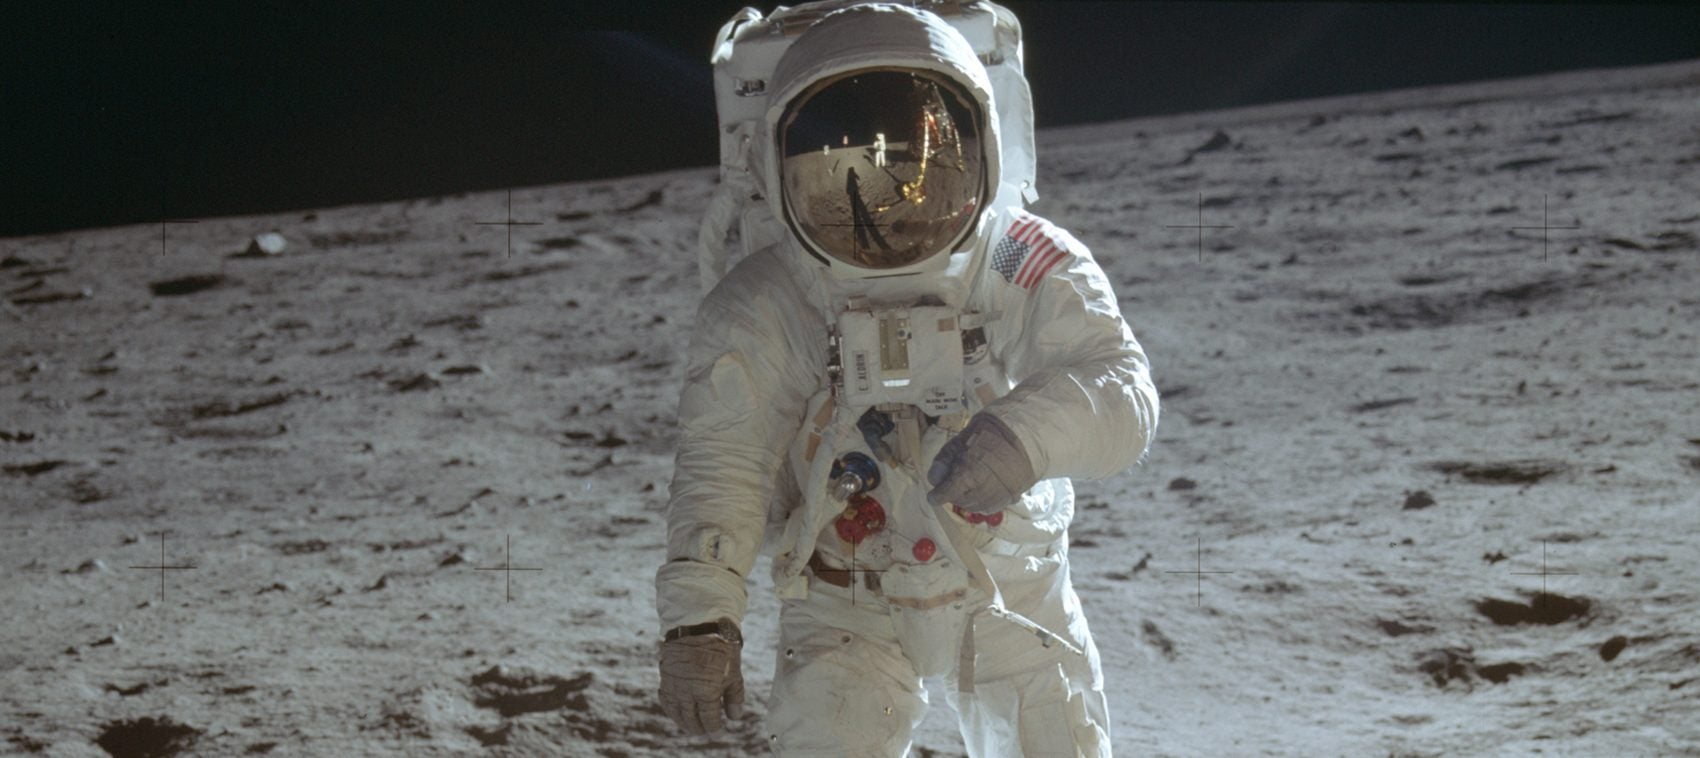 In this July 20, 1969 photo made available by NASA, astronaut Buzz Aldrin, lunar module pilot, walks on the surface of the moon near the leg of the Lunar Module 